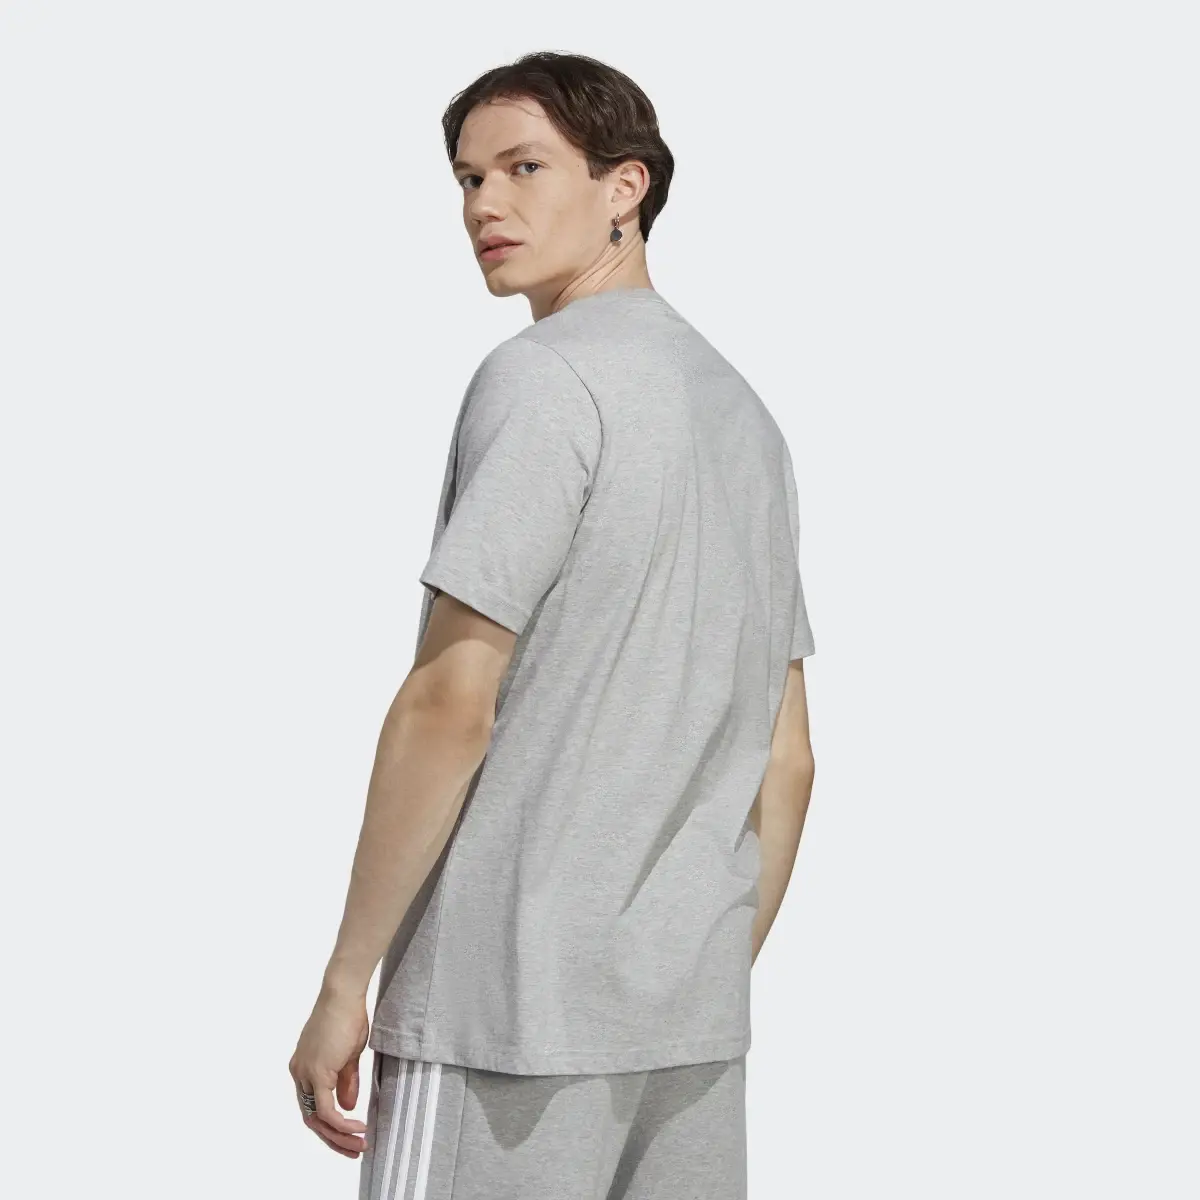 Adidas Essentials Single Jersey Embroidered Small Logo T-Shirt. 3